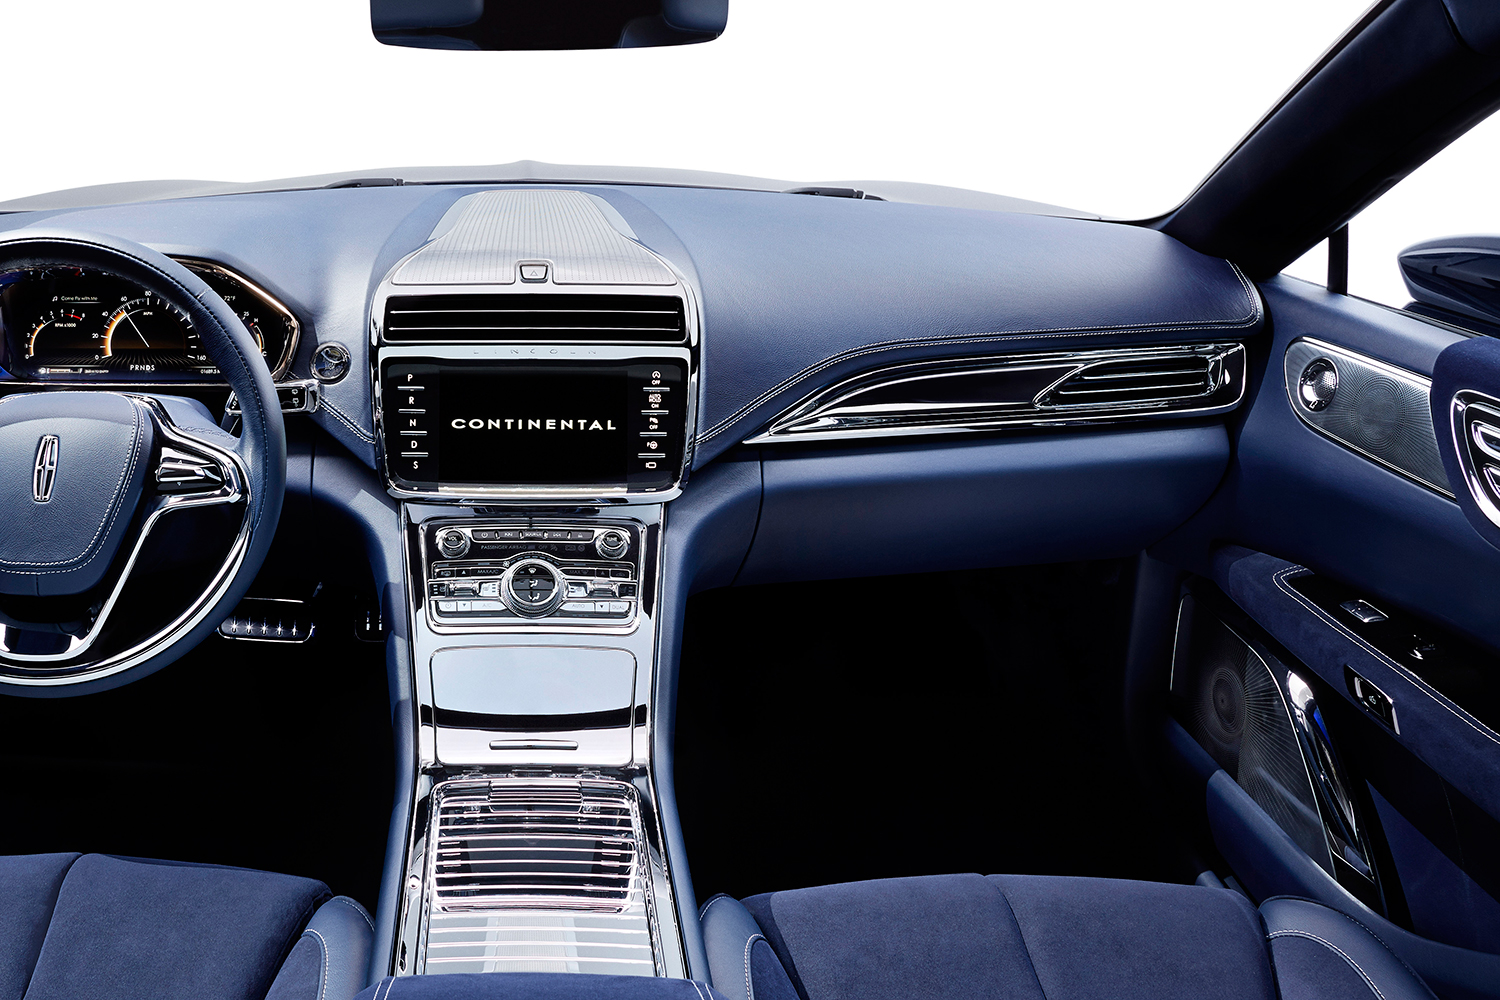 top 5 concept cars of 2015 opinion pictures specs lincolncontinentalconcept 07 interior b